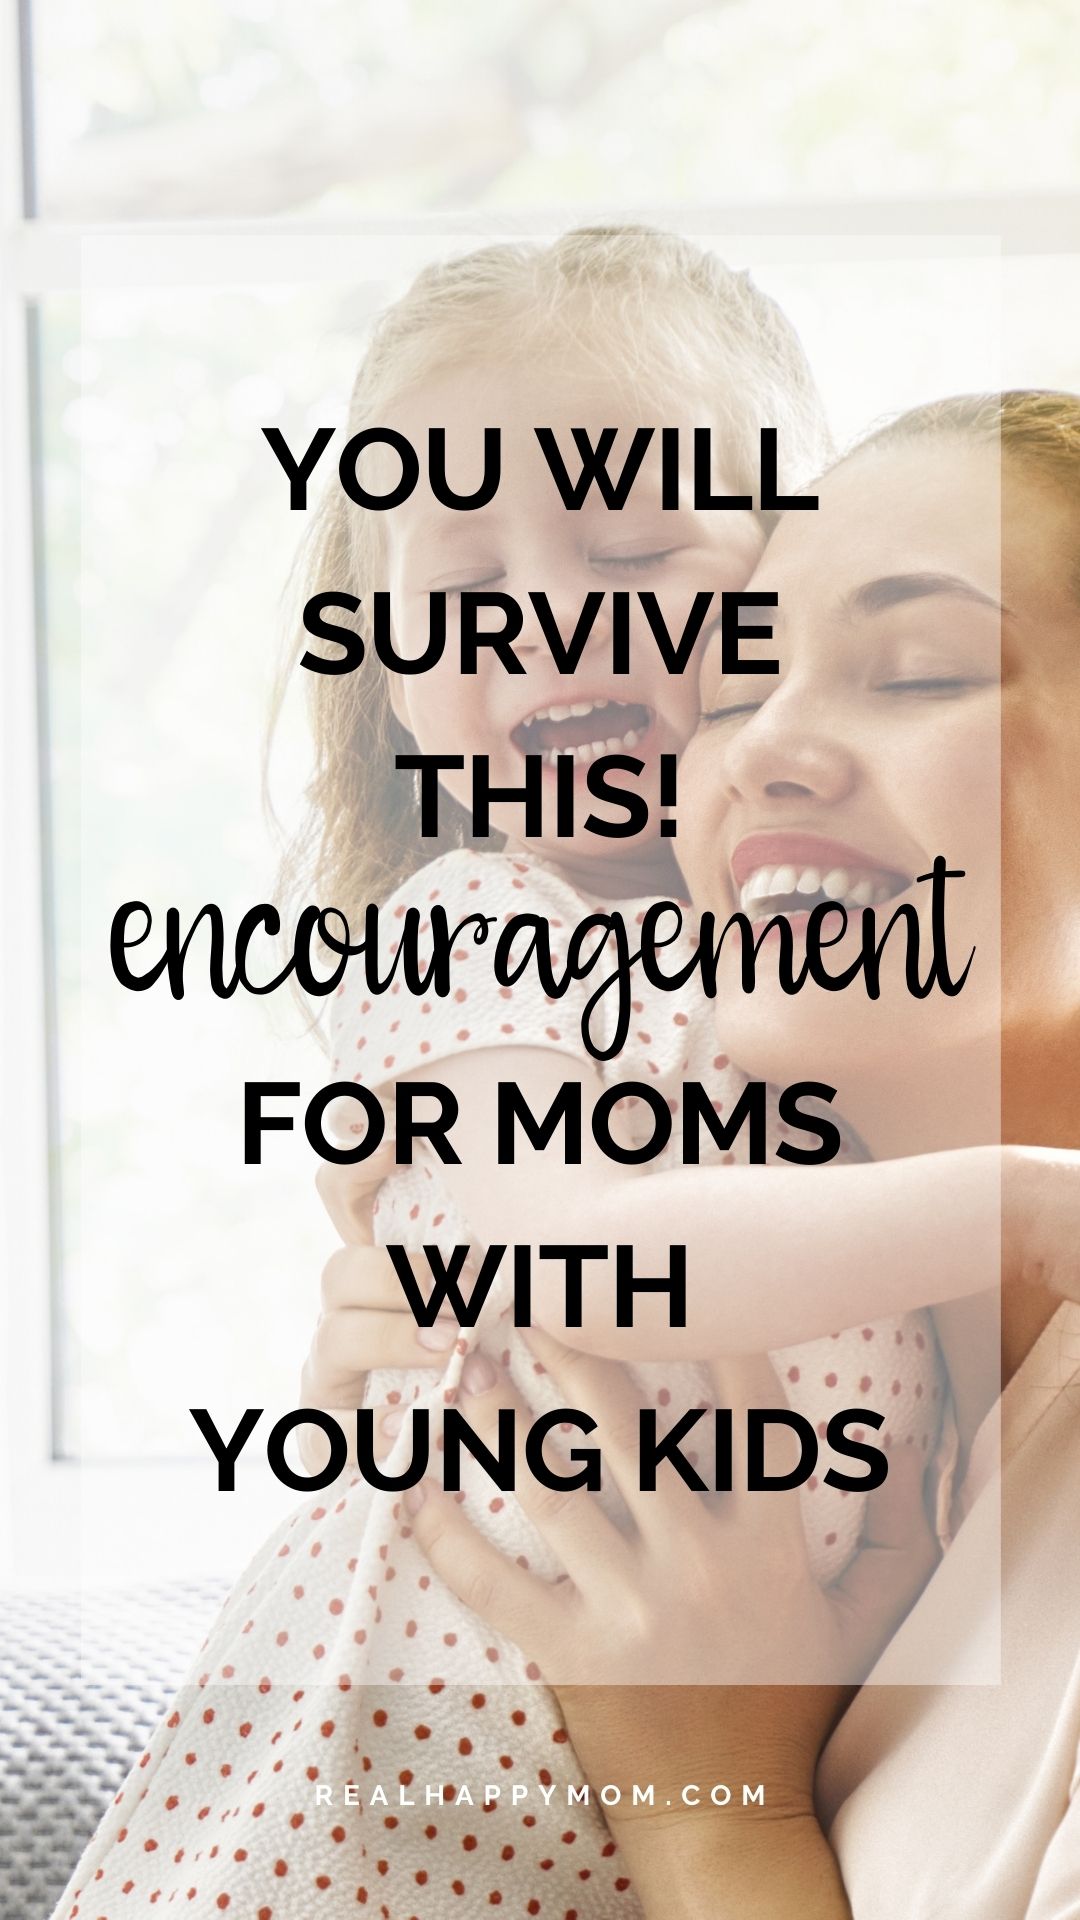 You Will Survive This! Encouragement For Moms with Young Kids